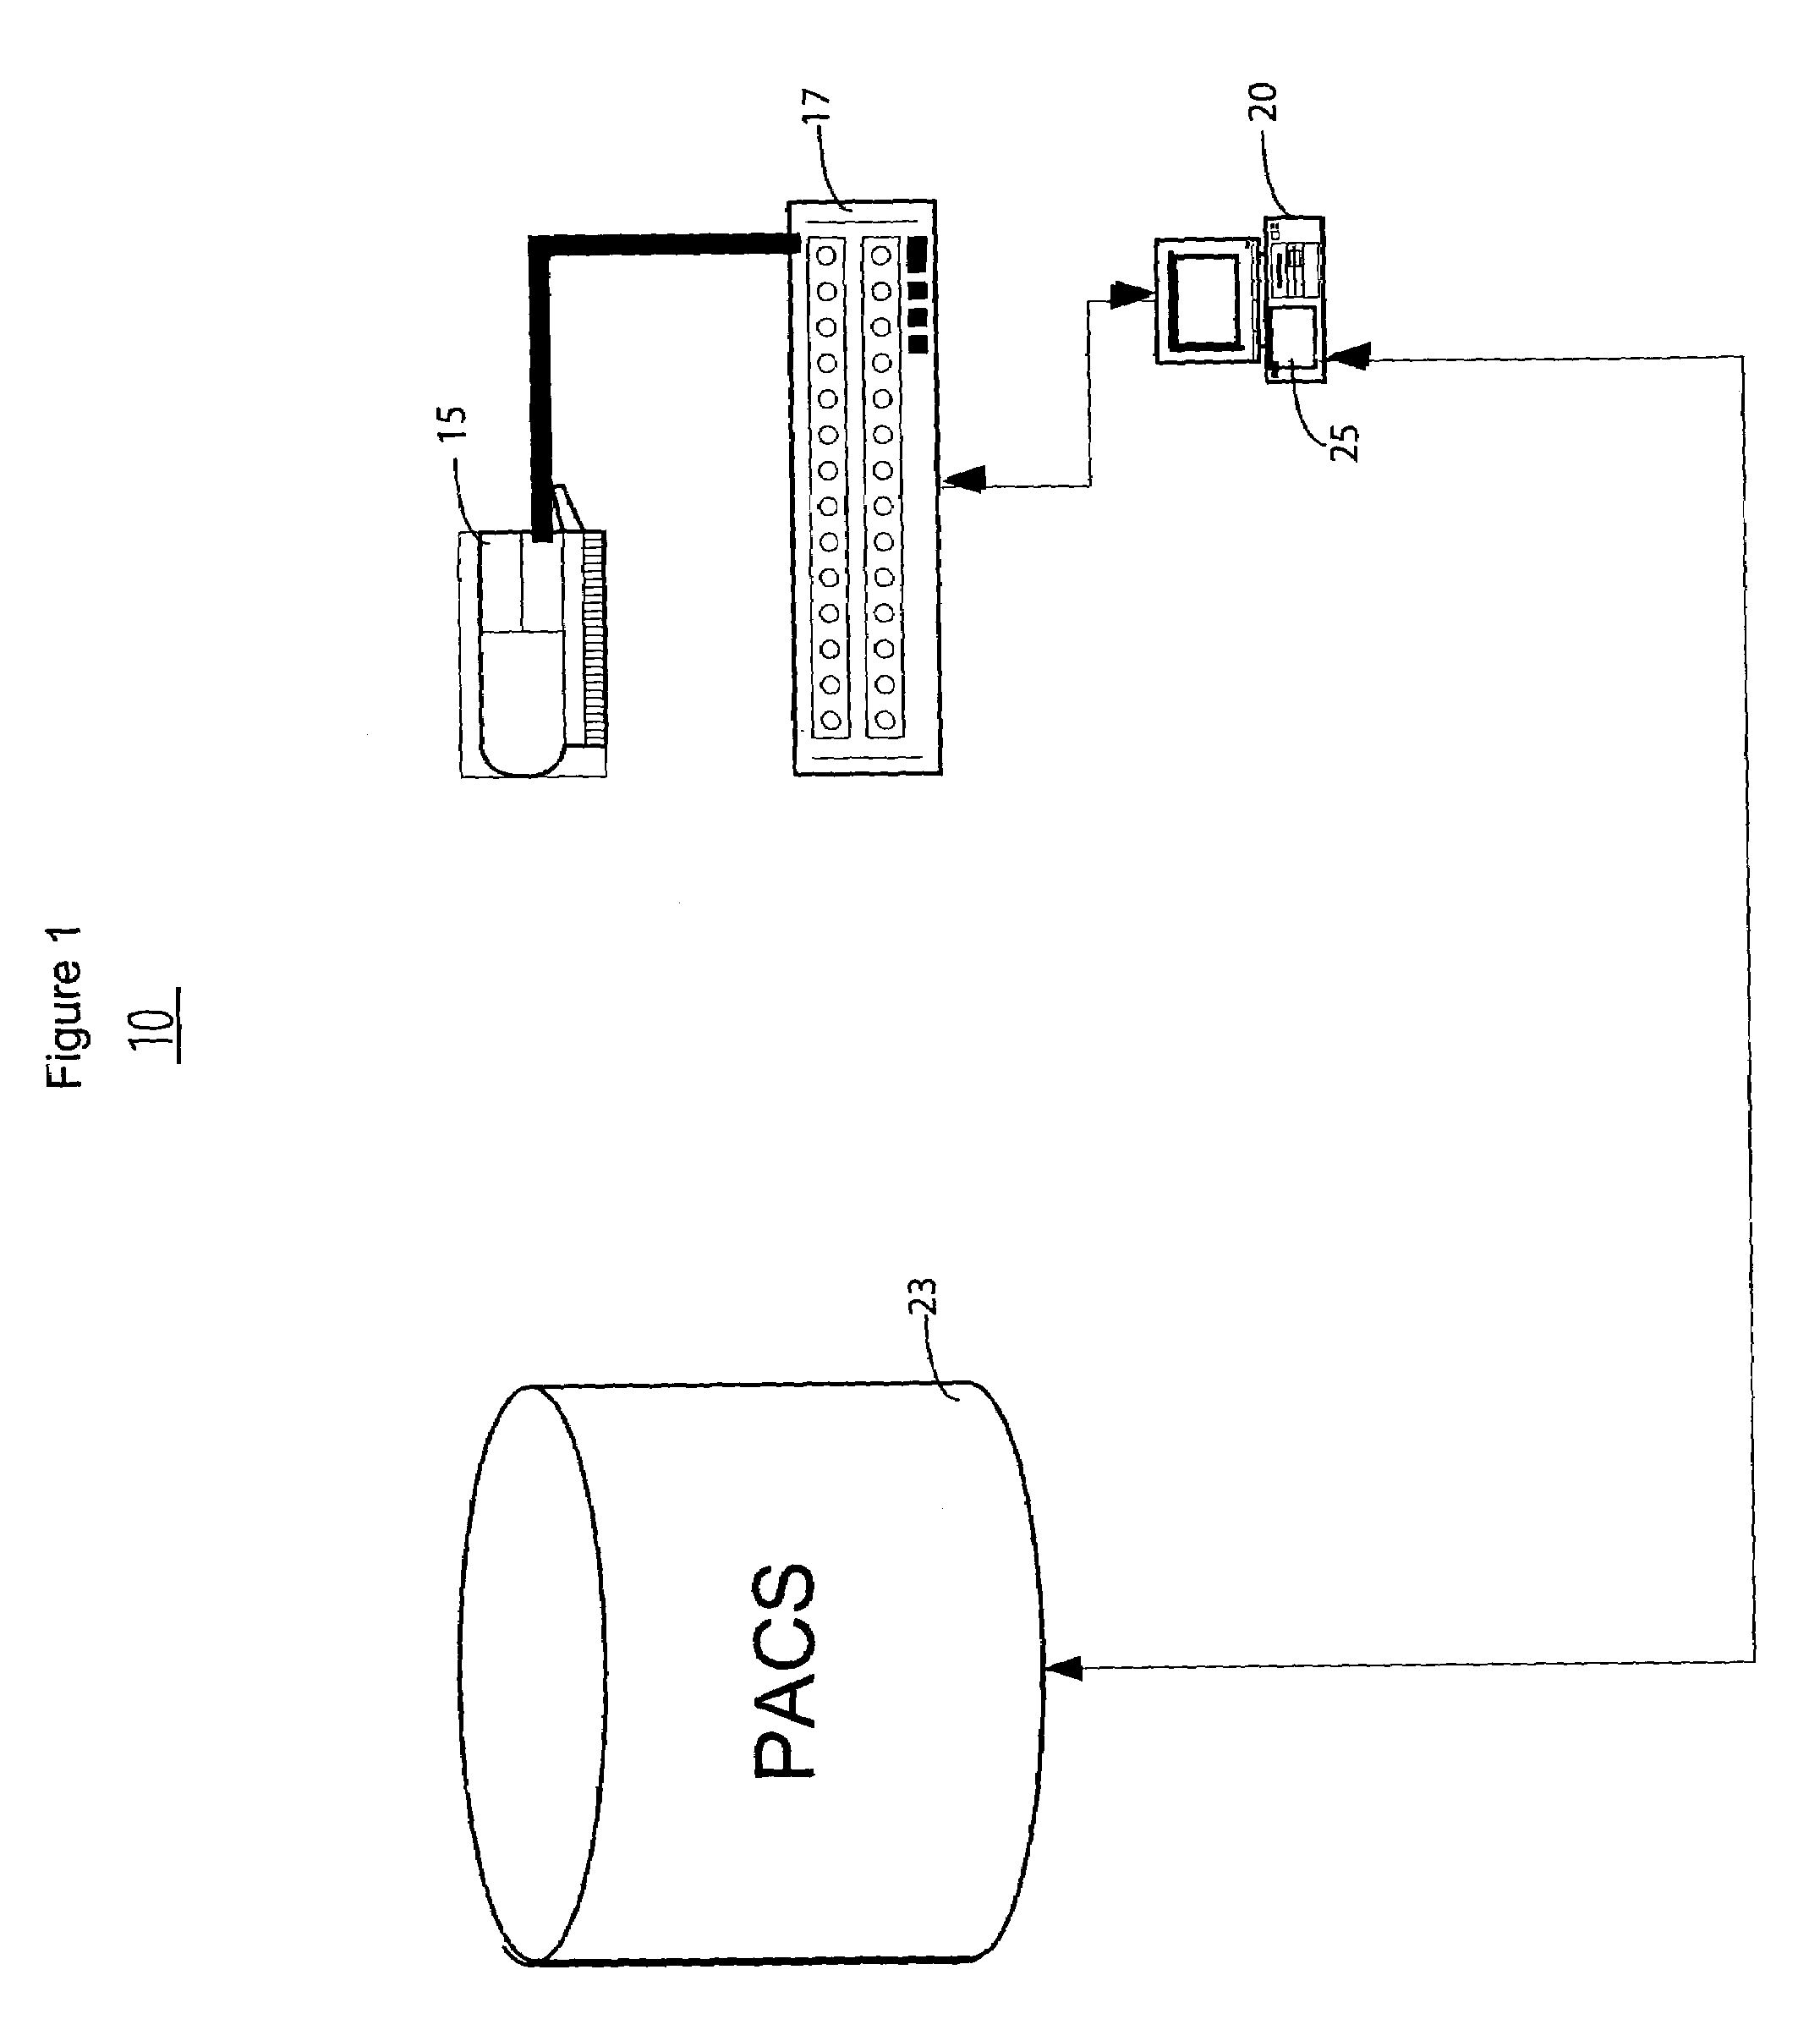 Beam therapy treatment user interface monitoring and recording system